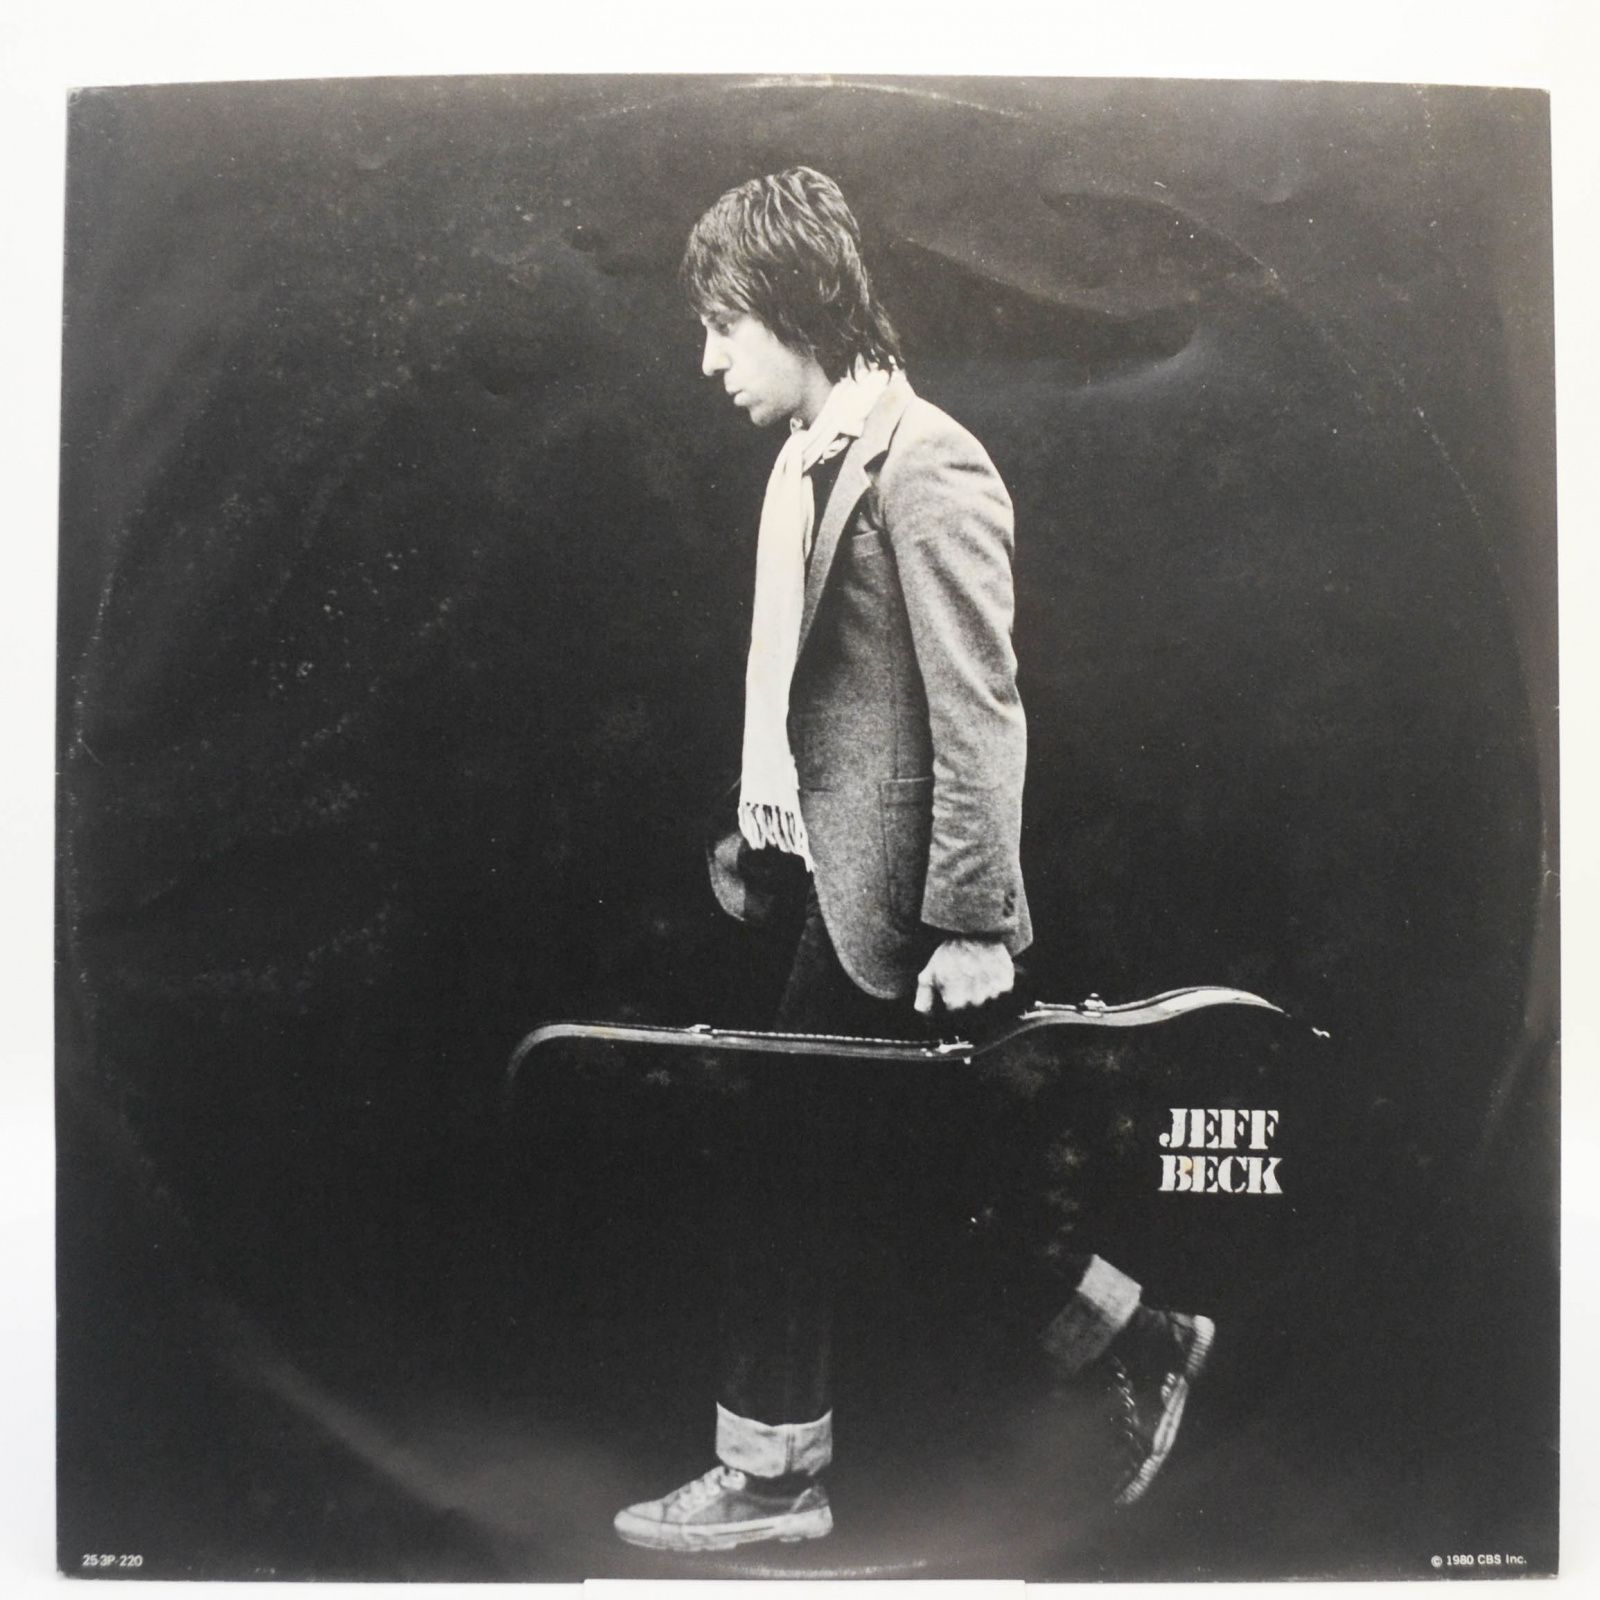 Jeff Beck — There and Back, 1980